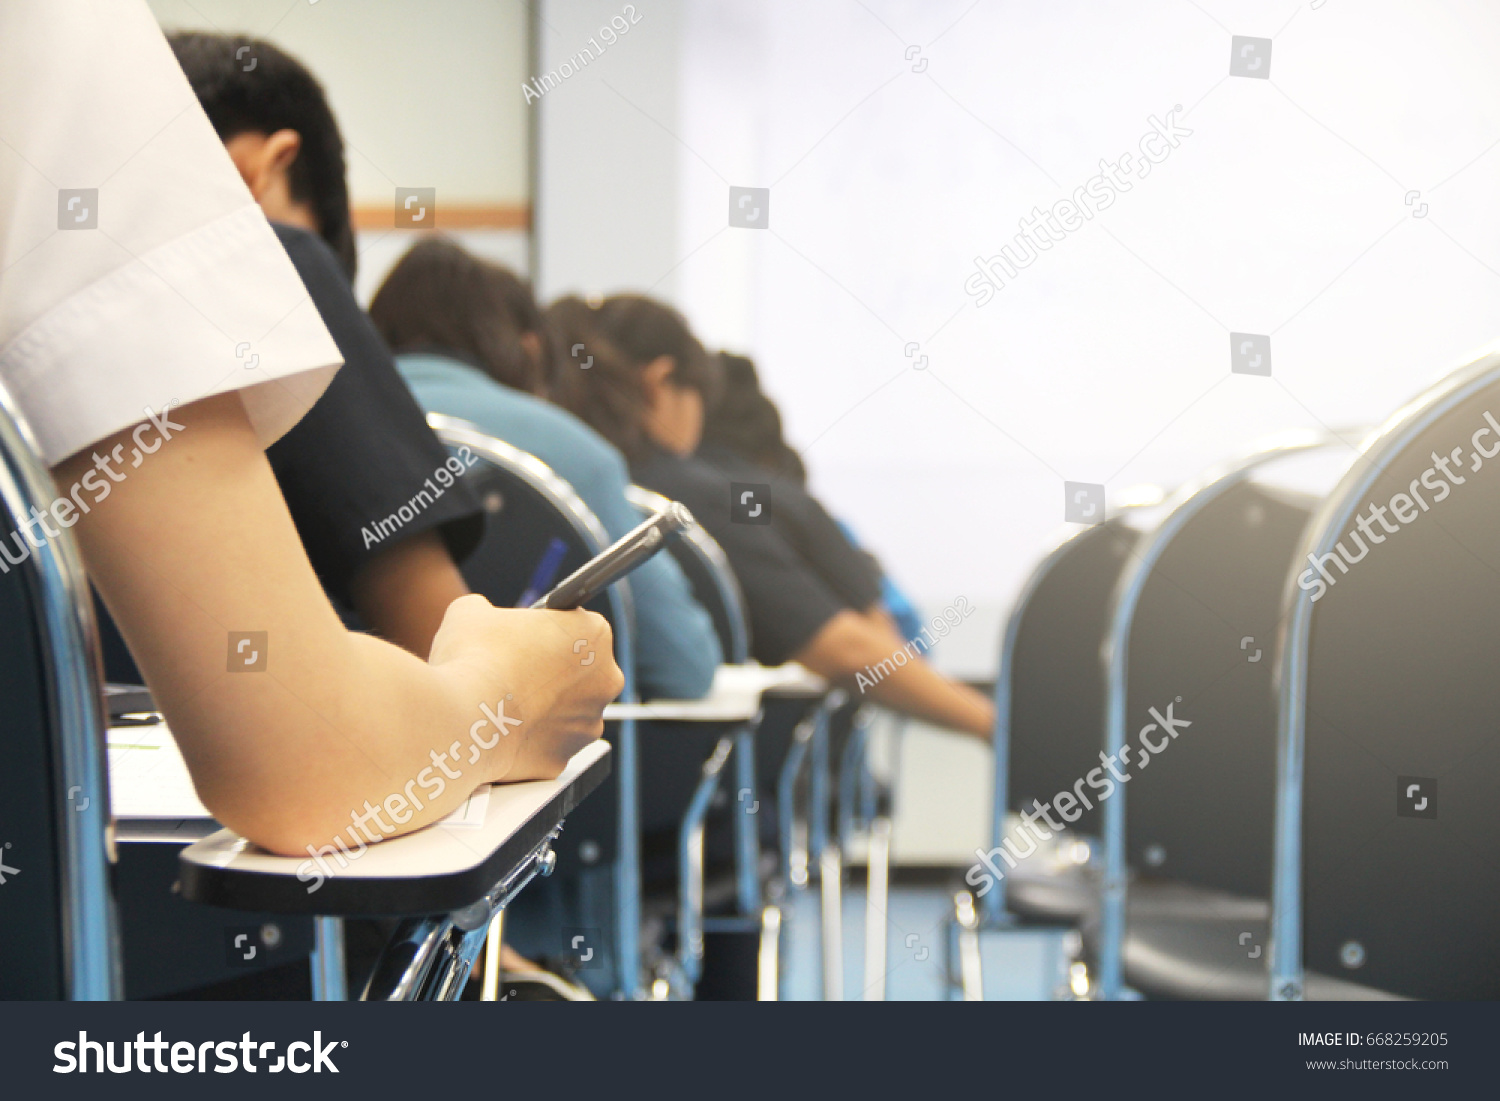 Hands university student holding pen writing /calculator doing examination / study or quiz, test from teacher or in large lecture room, students in uniform attending exam classroom educational school. #668259205